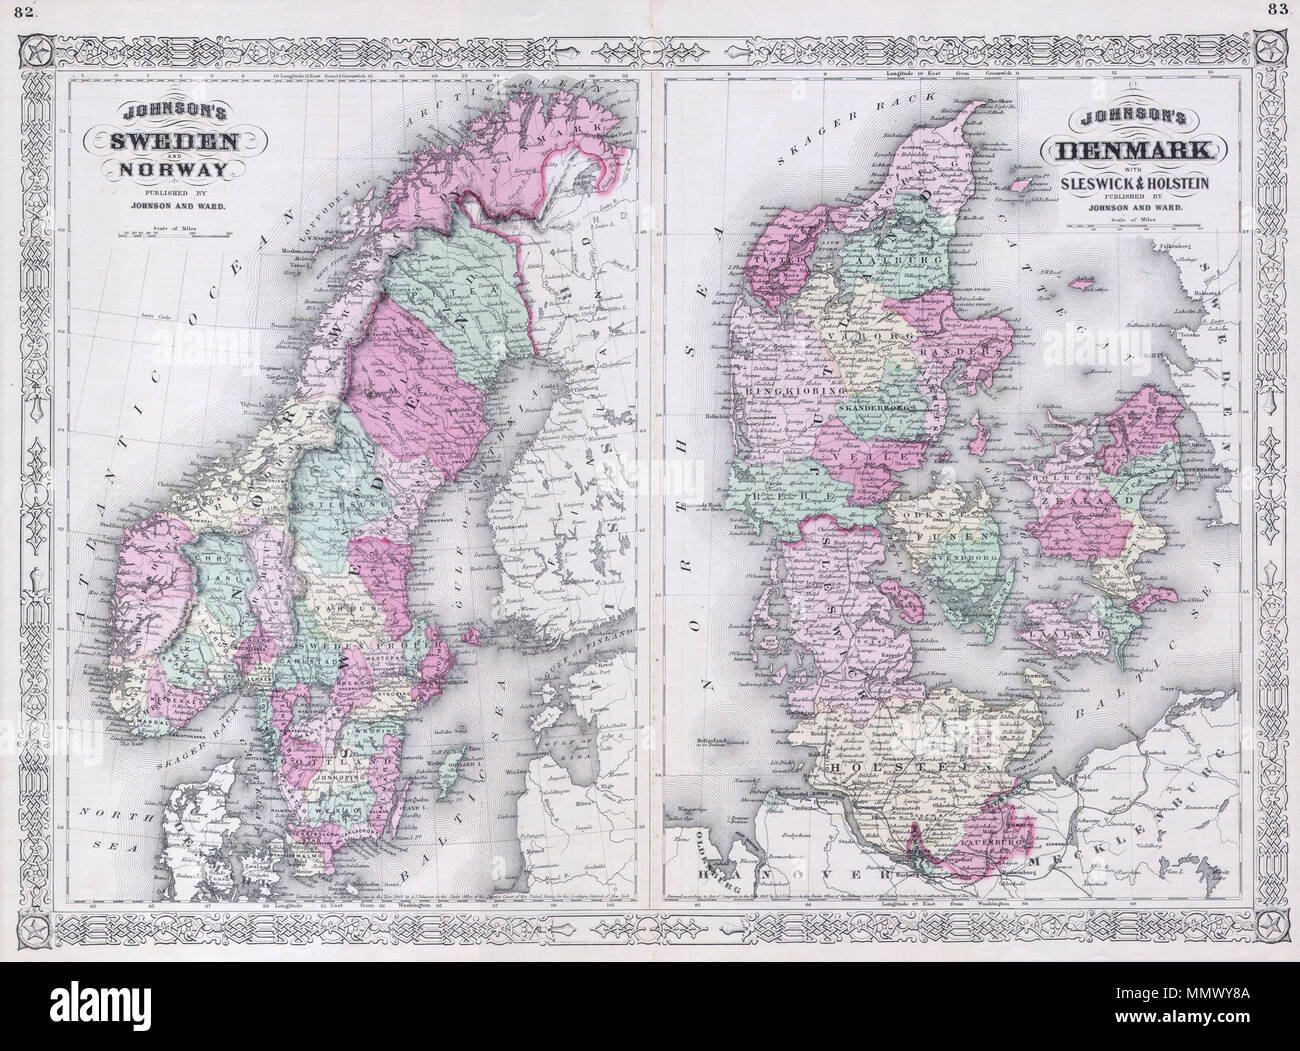 .  English: This is a magnificent 1865 hand colored map Scandinavia is divided into two parts. The left map represents Norway and Sweden. The right map depicts Denmark as well as the provinces of Sleswick & Holstein. Depicts the area in considerable detail including both political and physical geographic features. Map is dated and copyrighted, “Entered according to Act of Congress in the Year of 1865 by A. J. Johnson in the Clerk’s Office of the District Court of the United States for the Southern District of New York”.  Johnson’s Sweden and Norway. - Johnson’s Denmark with Sleswick & Holstein Stock Photo